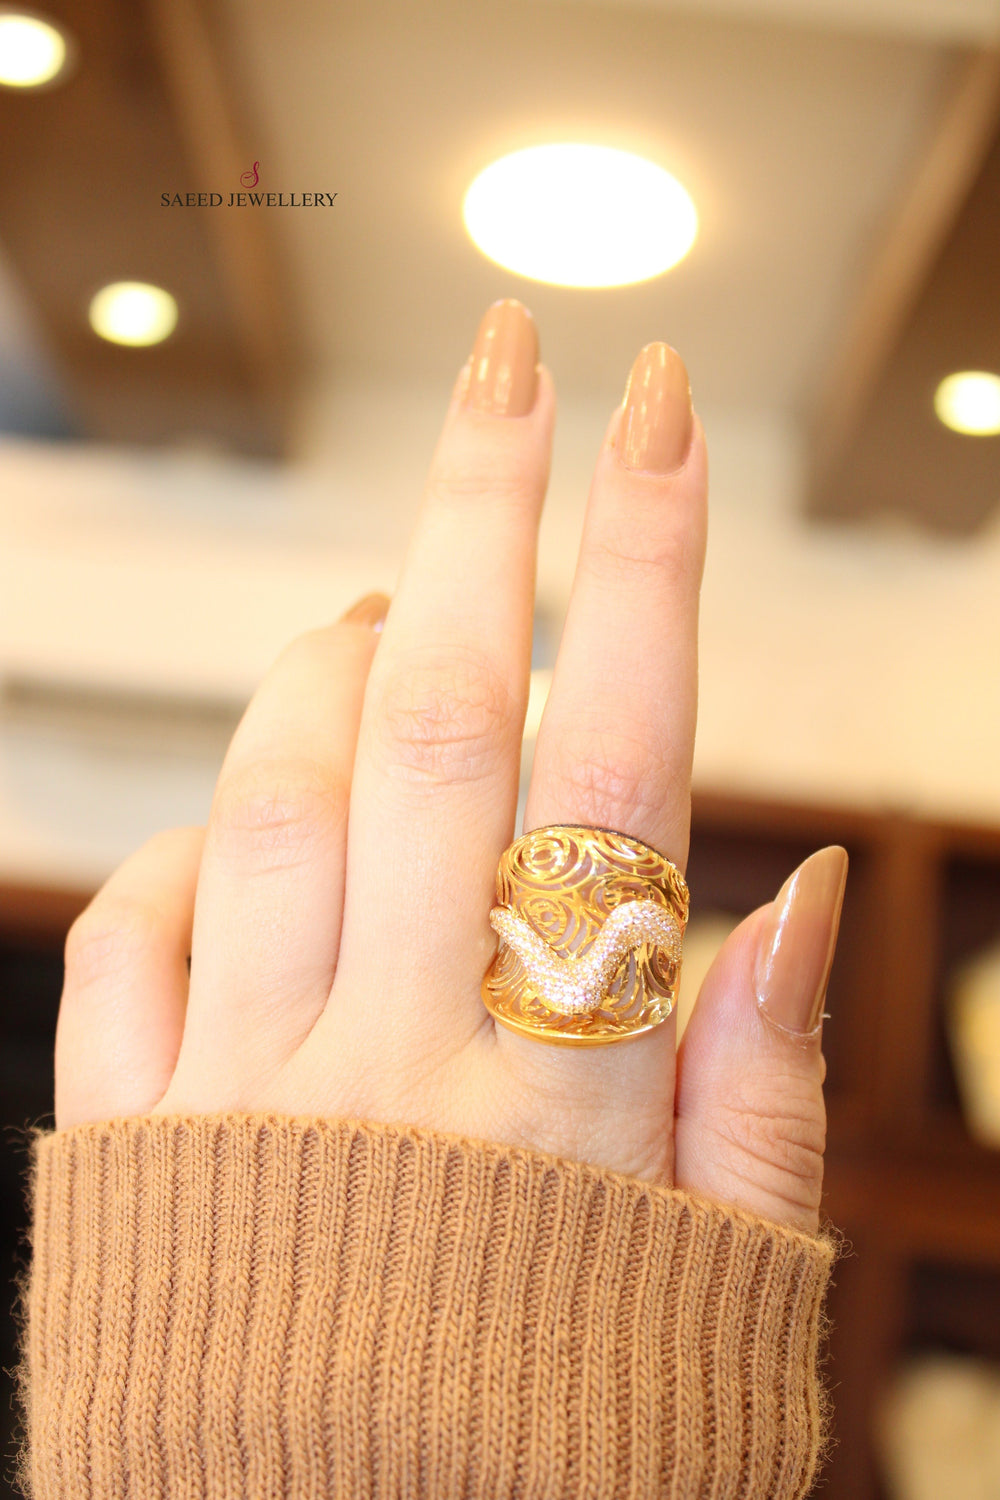 21K Zirconia Ring Made of 21K Yellow Gold by Saeed Jewelry-10312